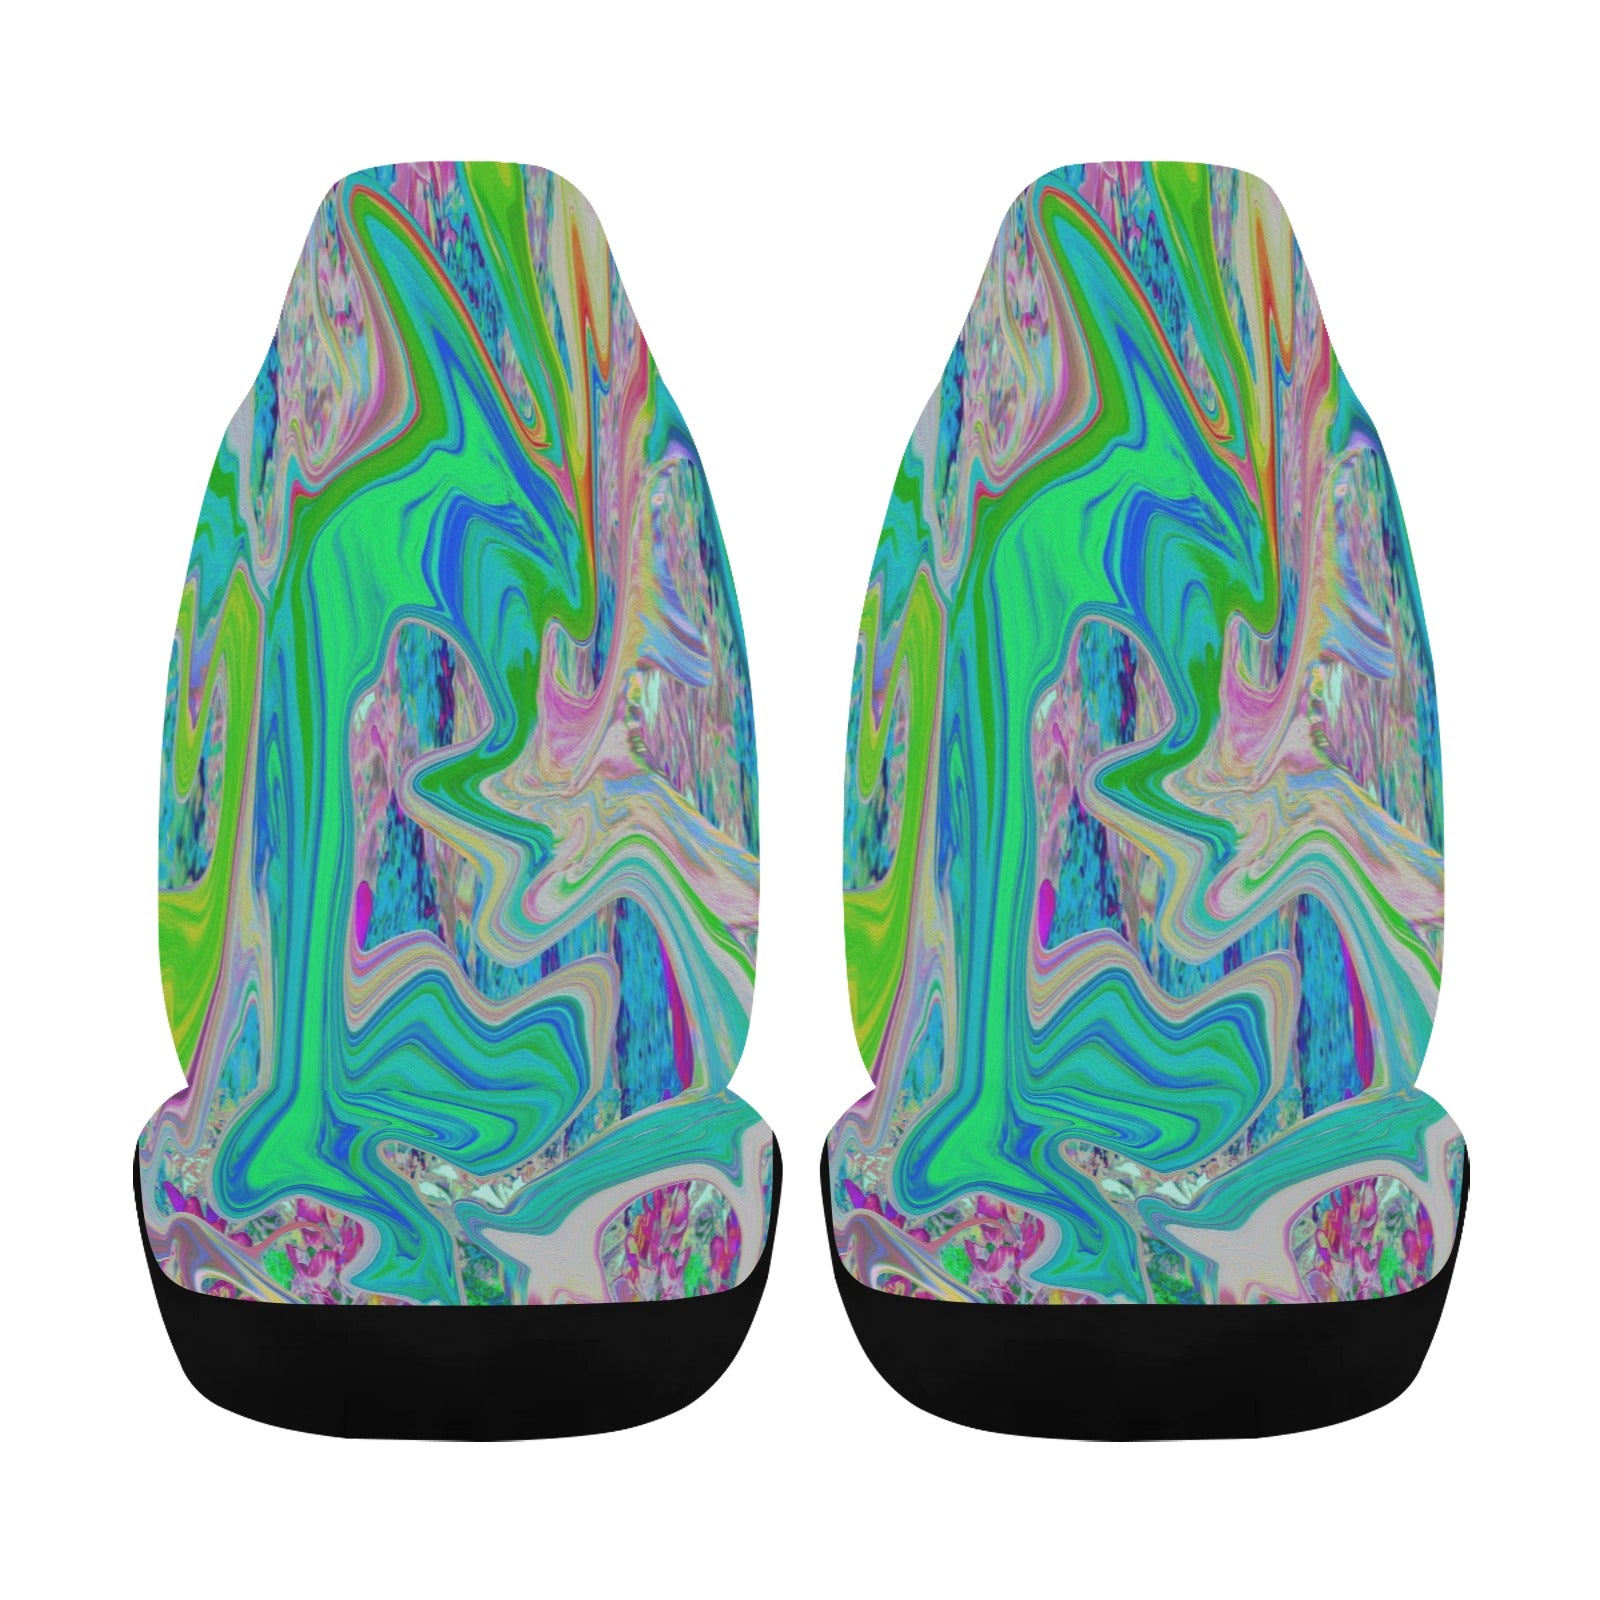 Car Seat Covers, Colorful Marbled Lime Green Abstract Retro Liquid Art